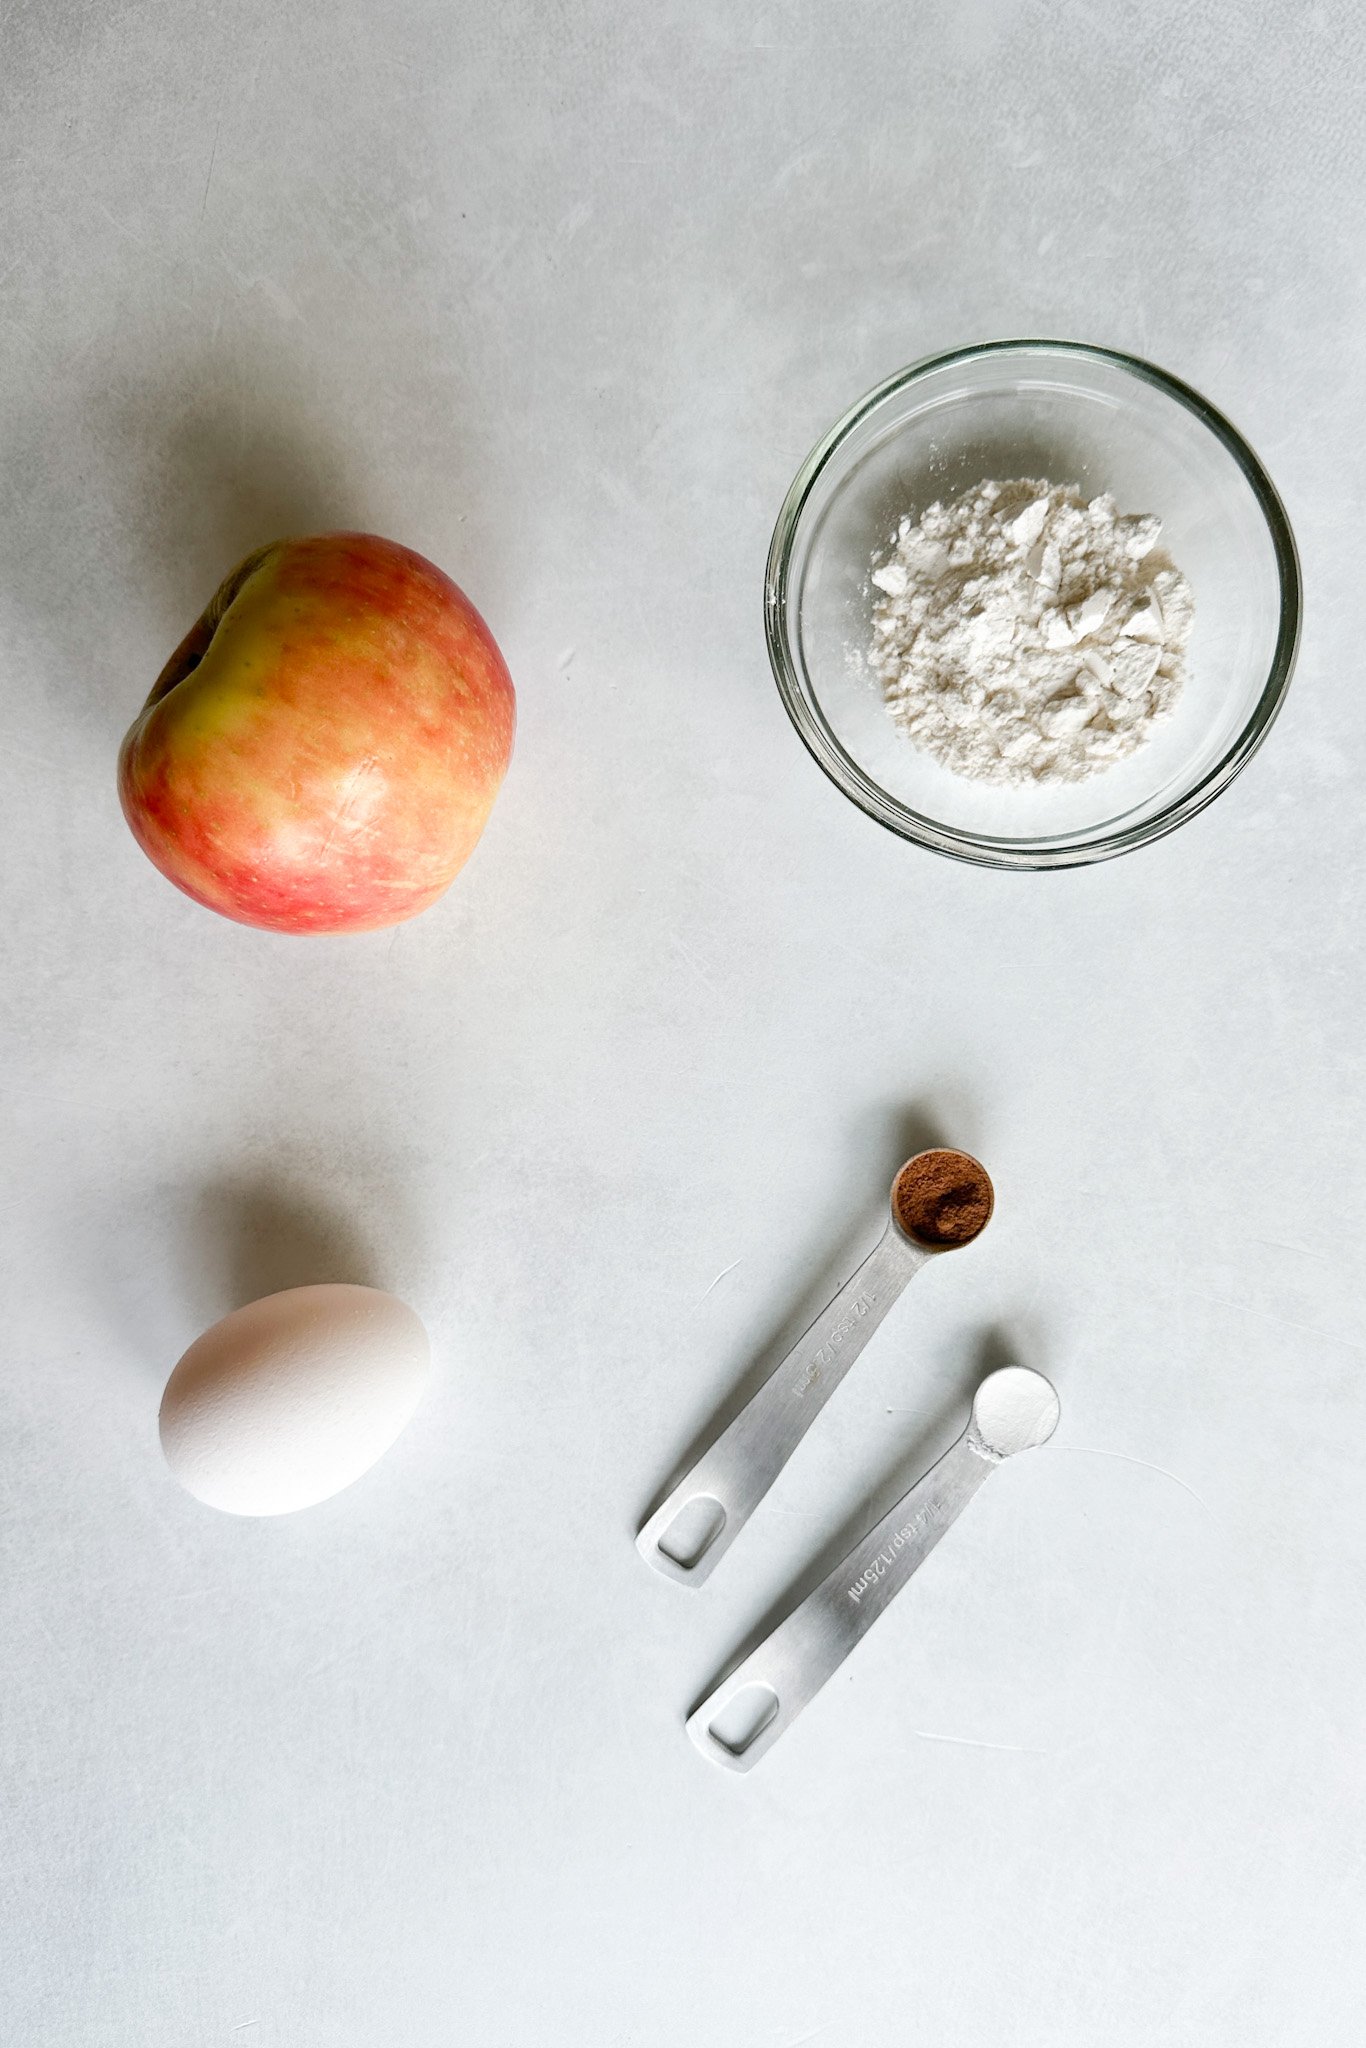 Ingredients to make apple fritters.